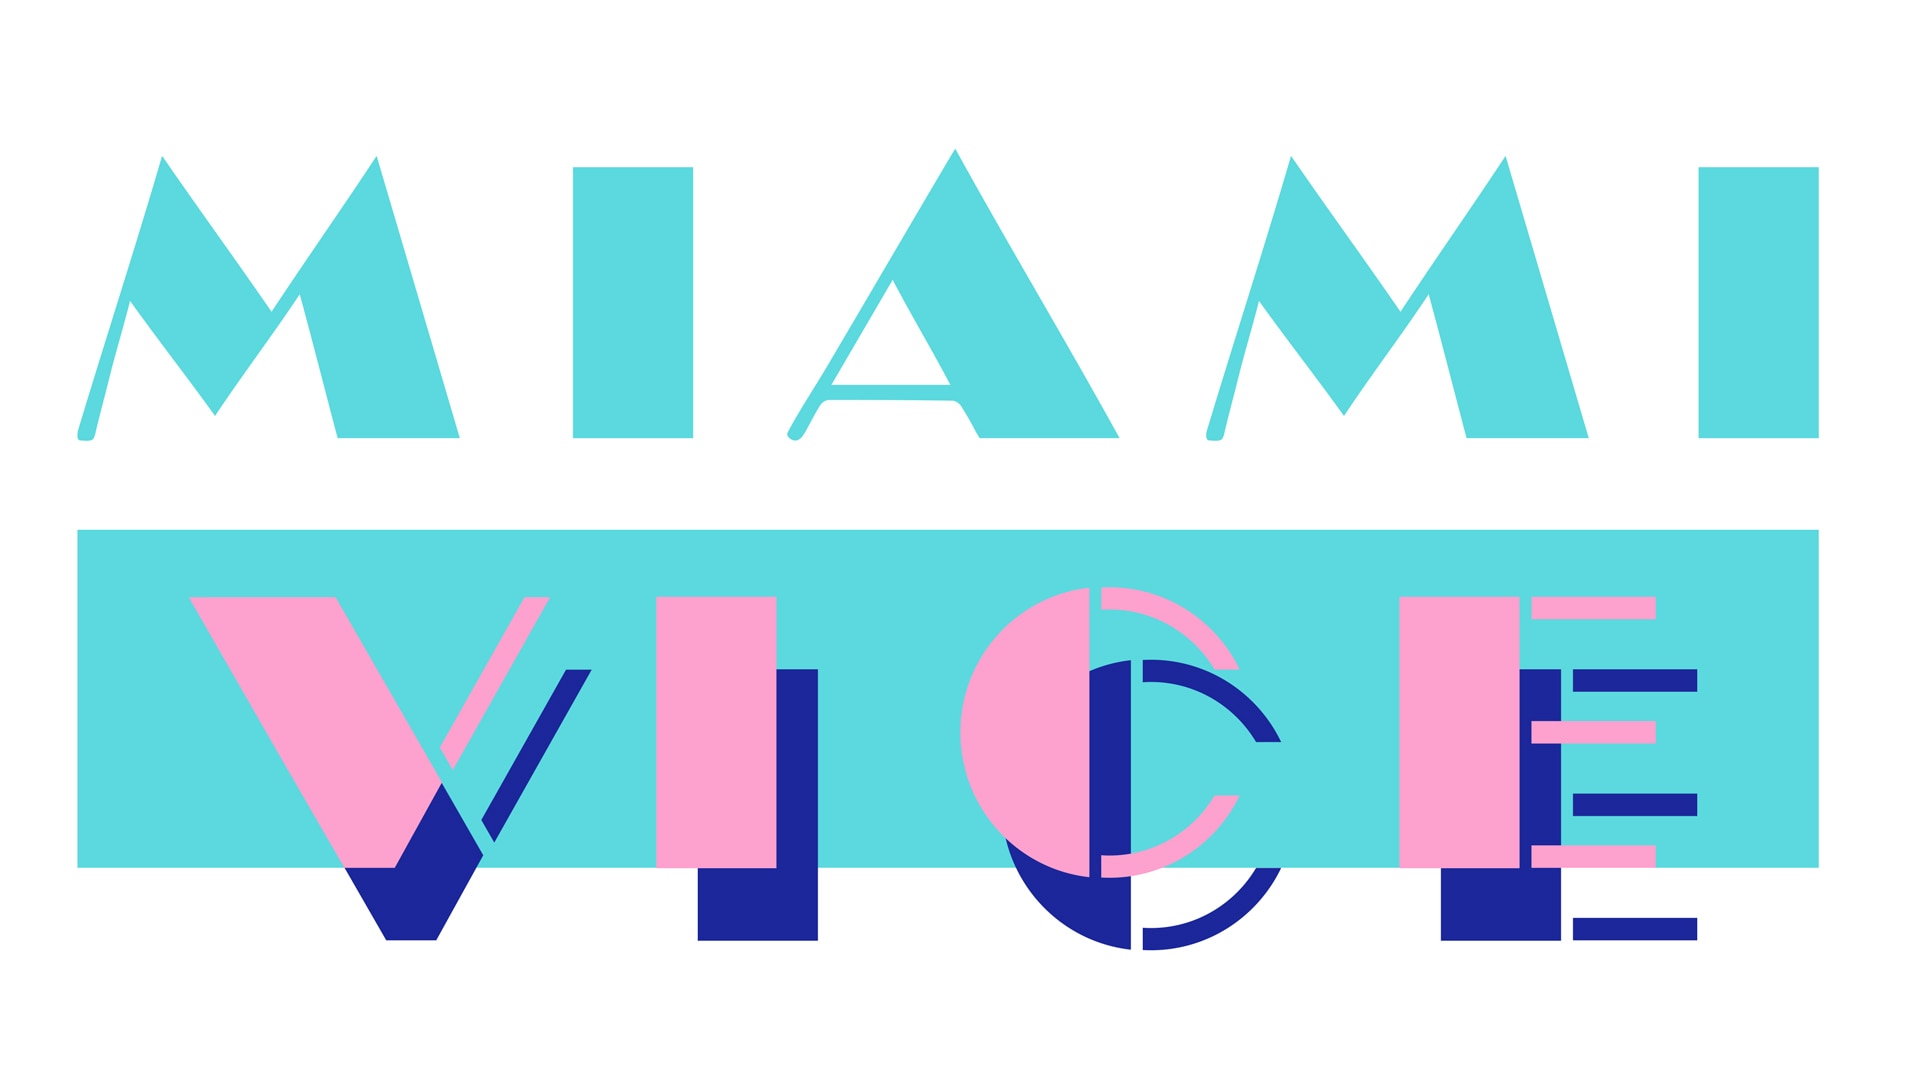 Miami Vice Netflix: The Ultimate 80s Crime Drama - Binge-Worthy Action, Glamour, and Intrigue! 11